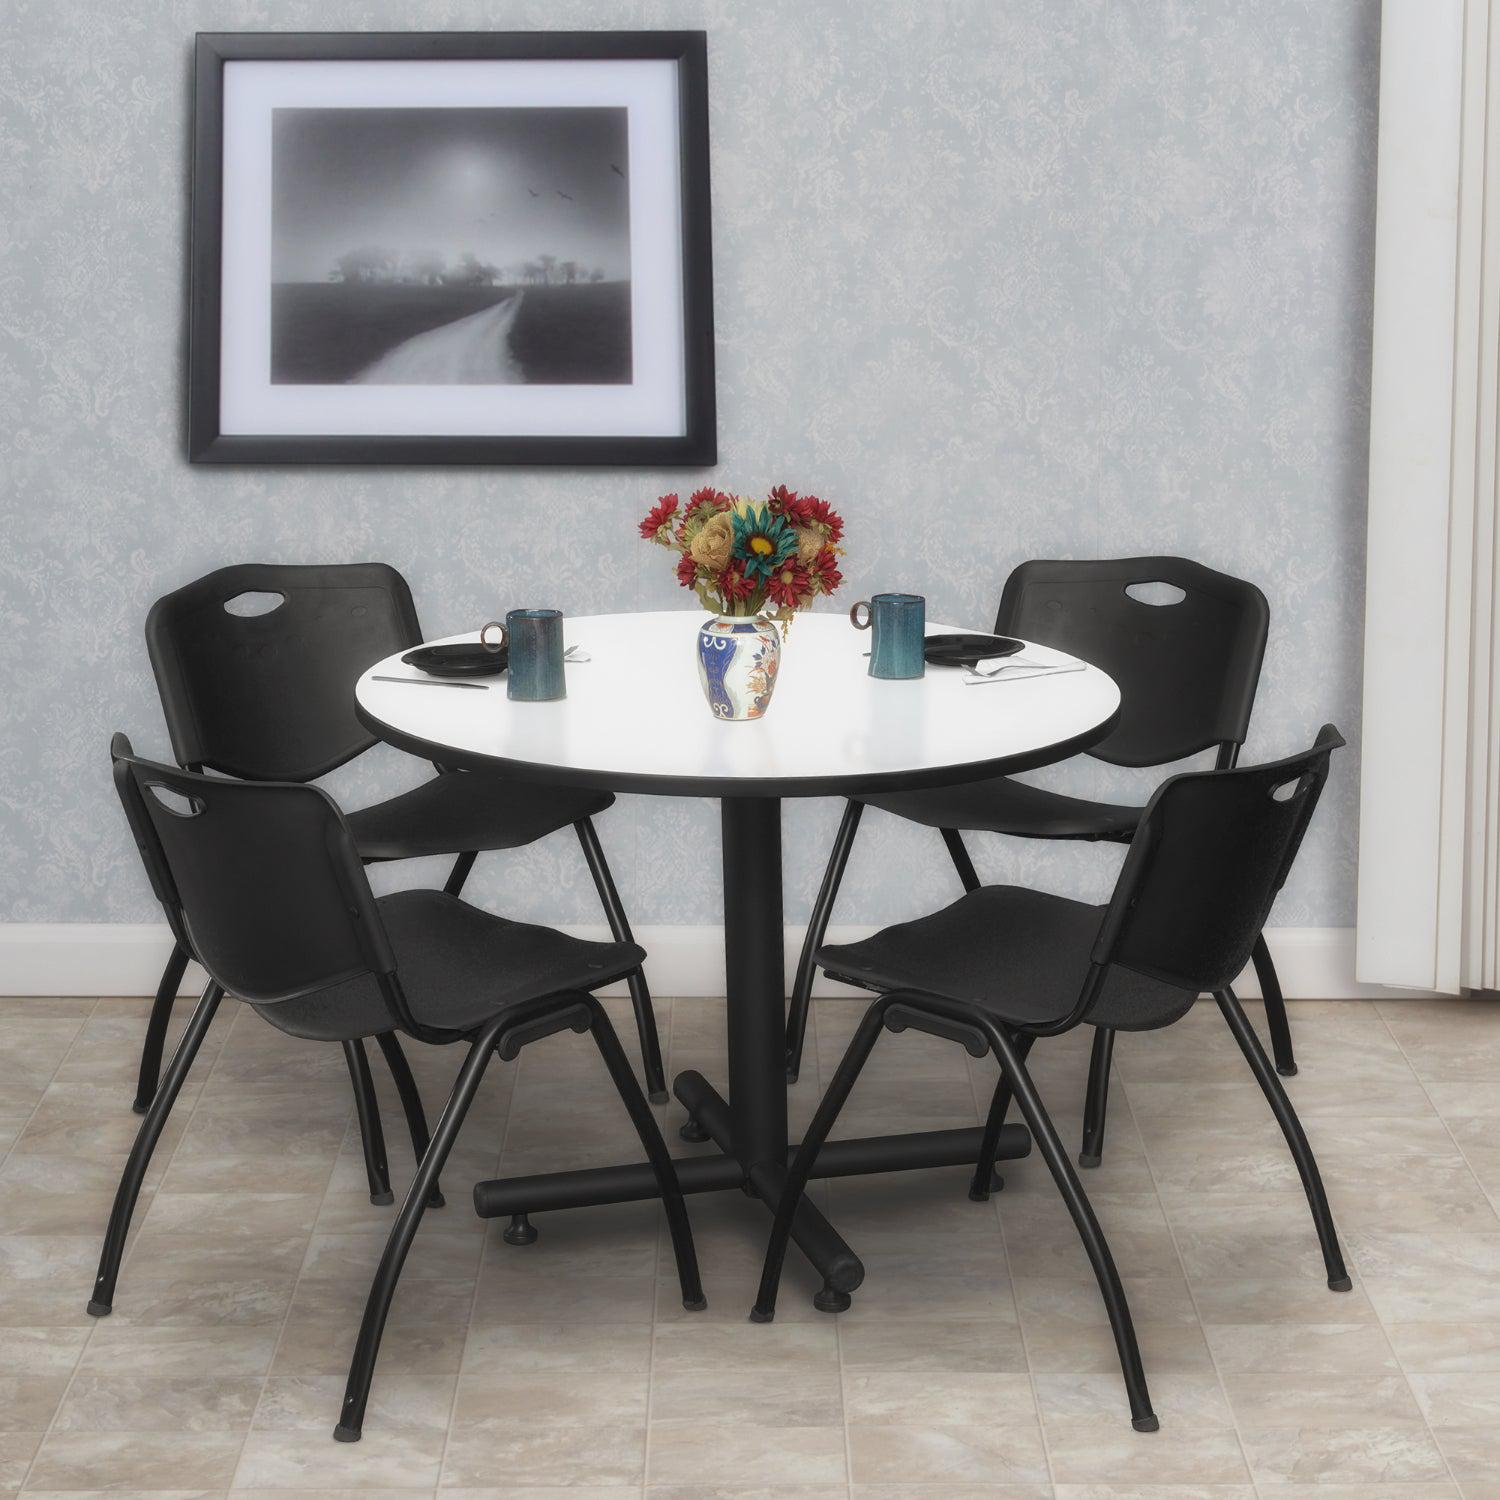 Kobe Round Breakroom Table and Chair Package, Kobe 36" Round X-Base Breakroom Table with 4 "M" Stack Chairs